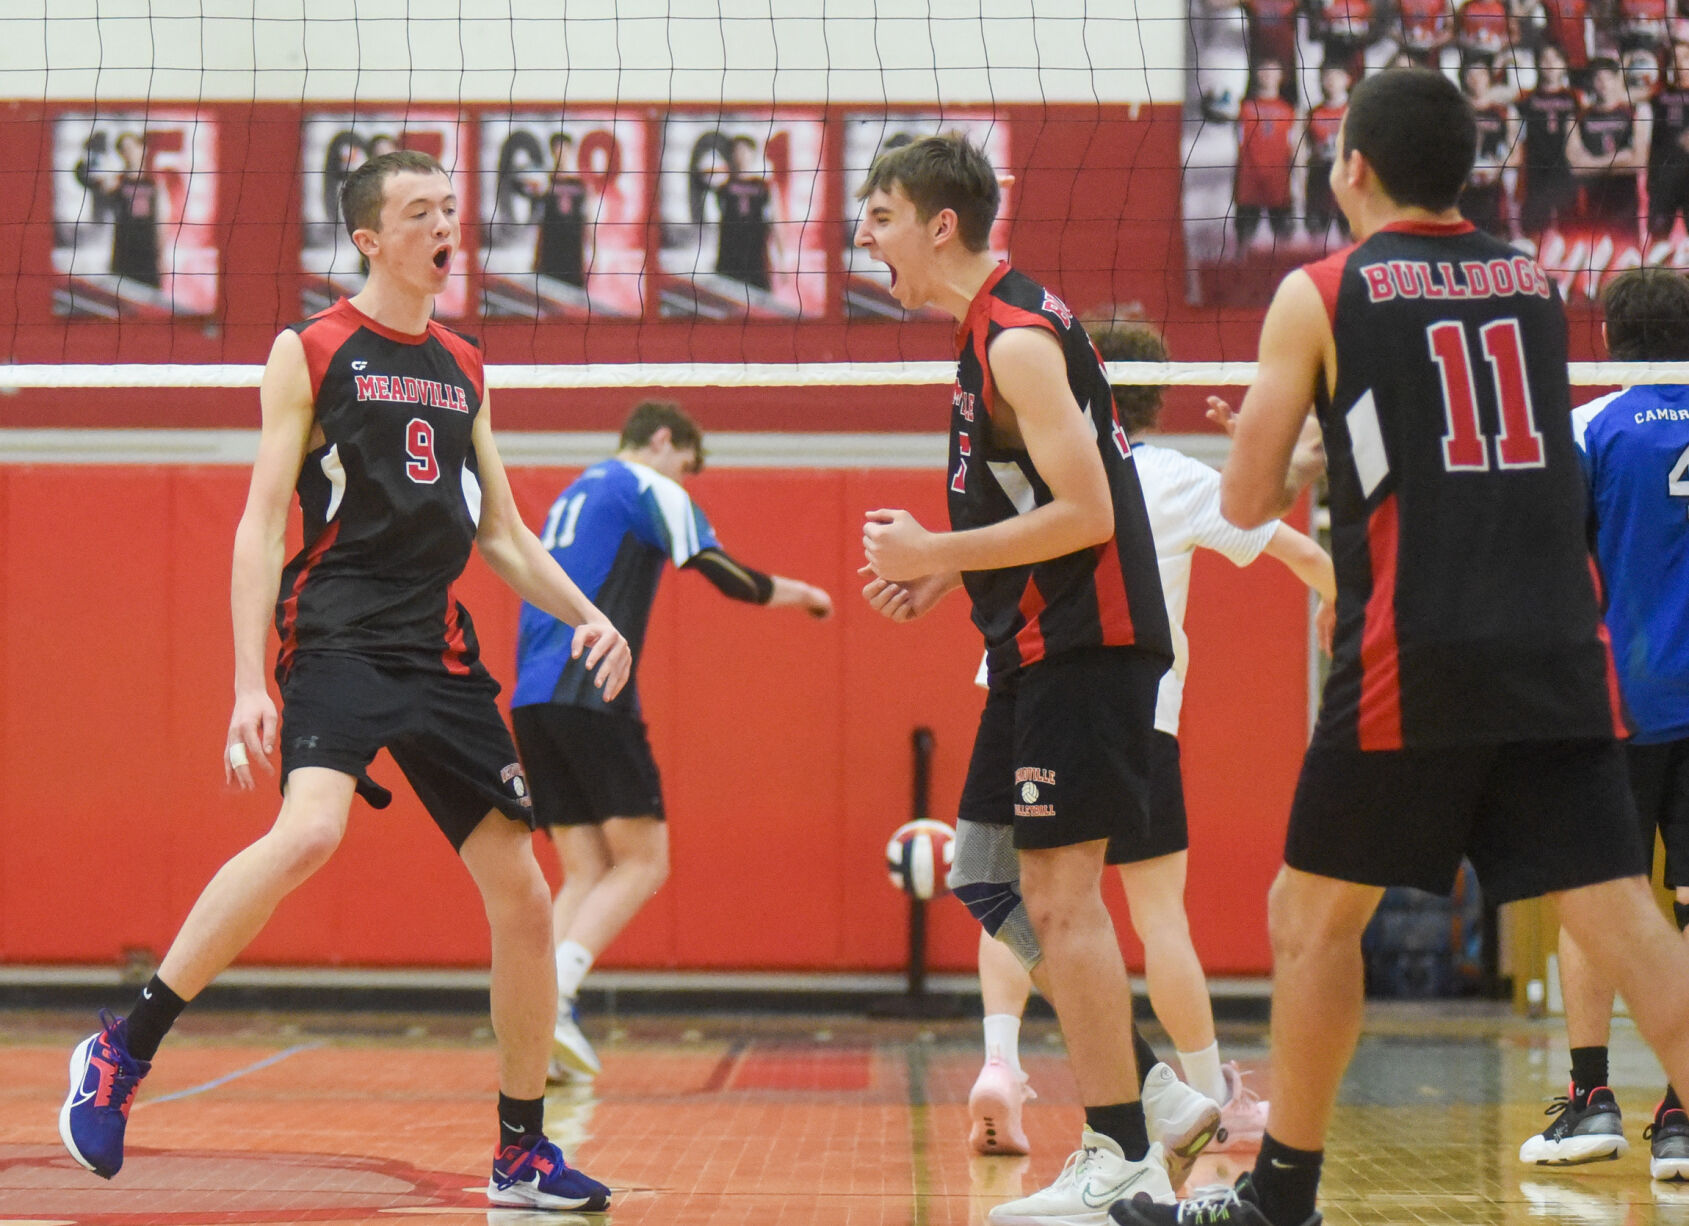 Bulldogs stay undefeated with sweep of Blue Devils